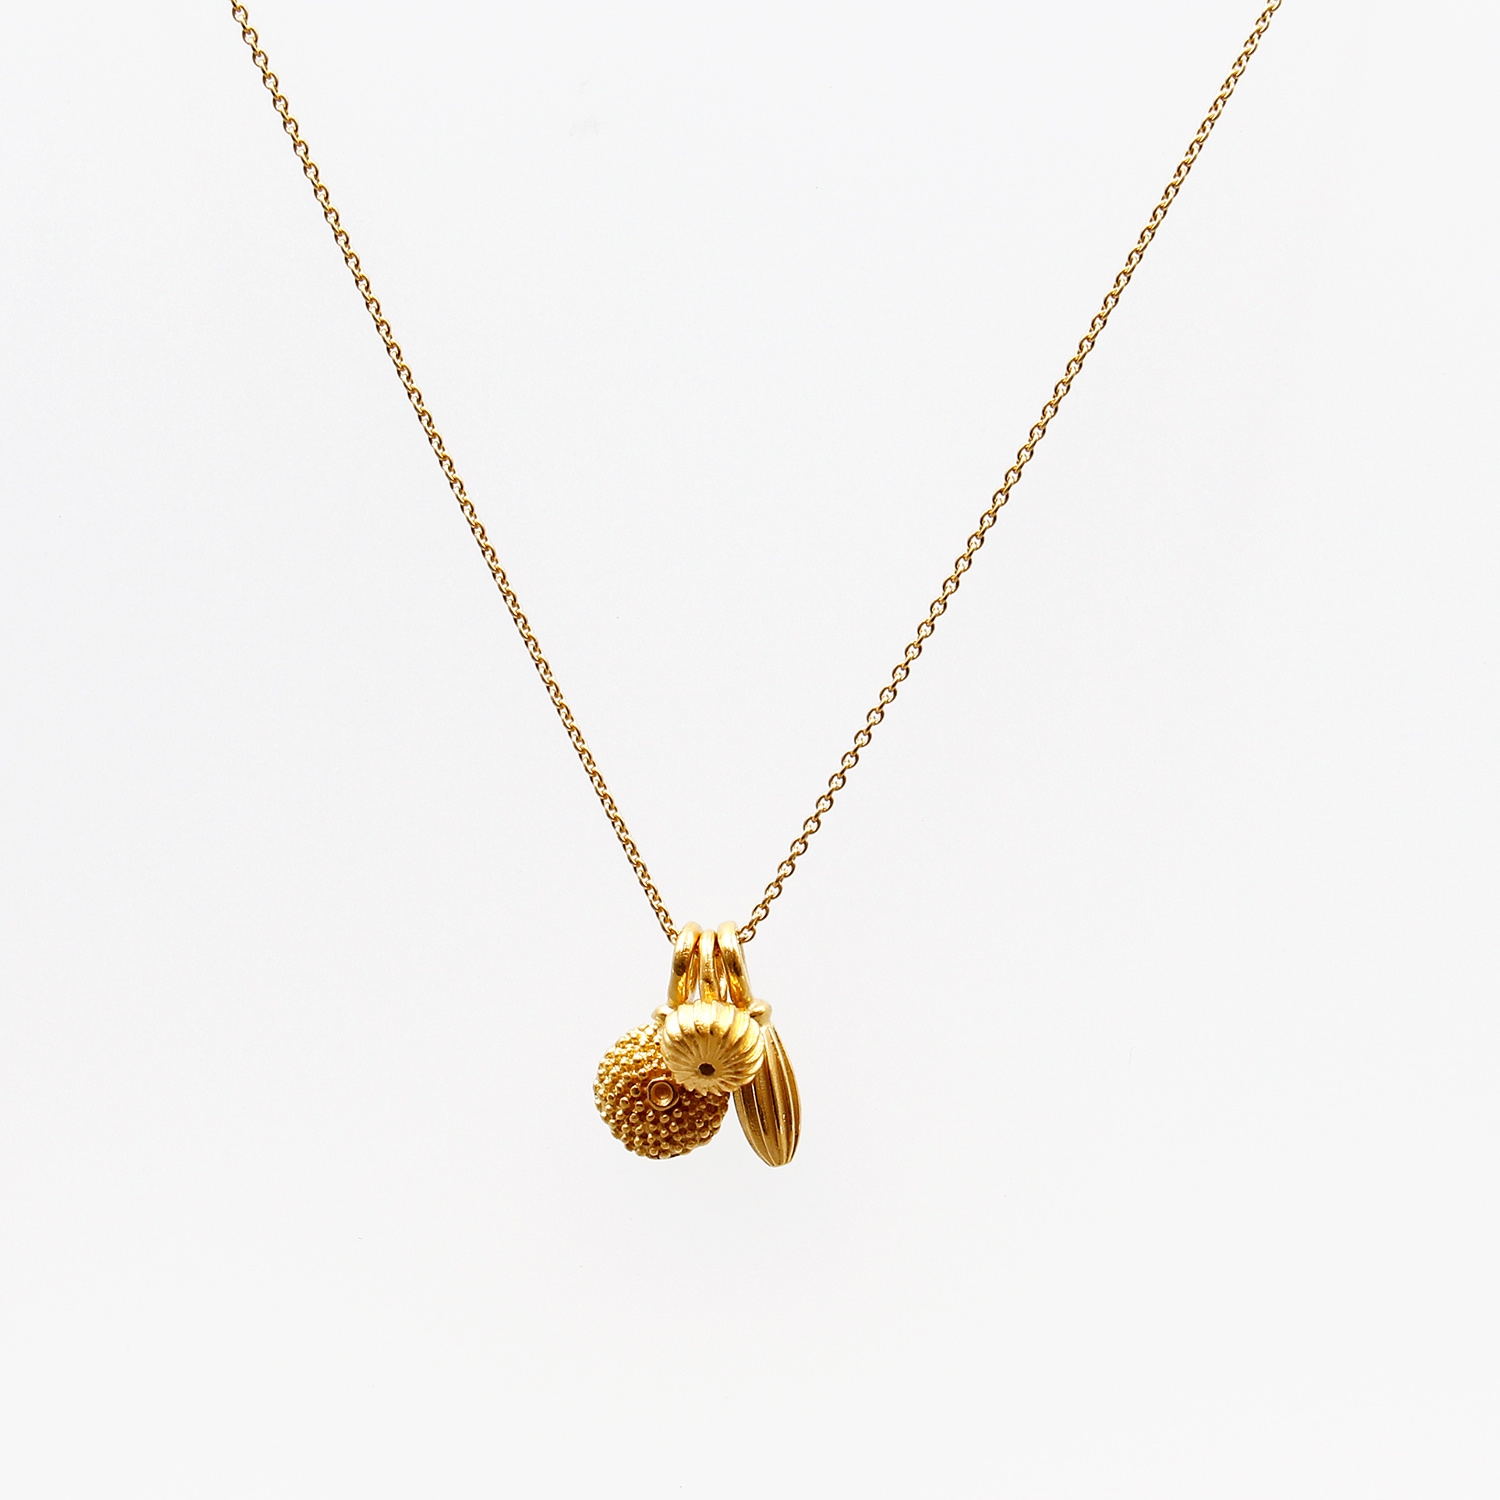 3 Pollen Cluster Necklace by Catherine Hills